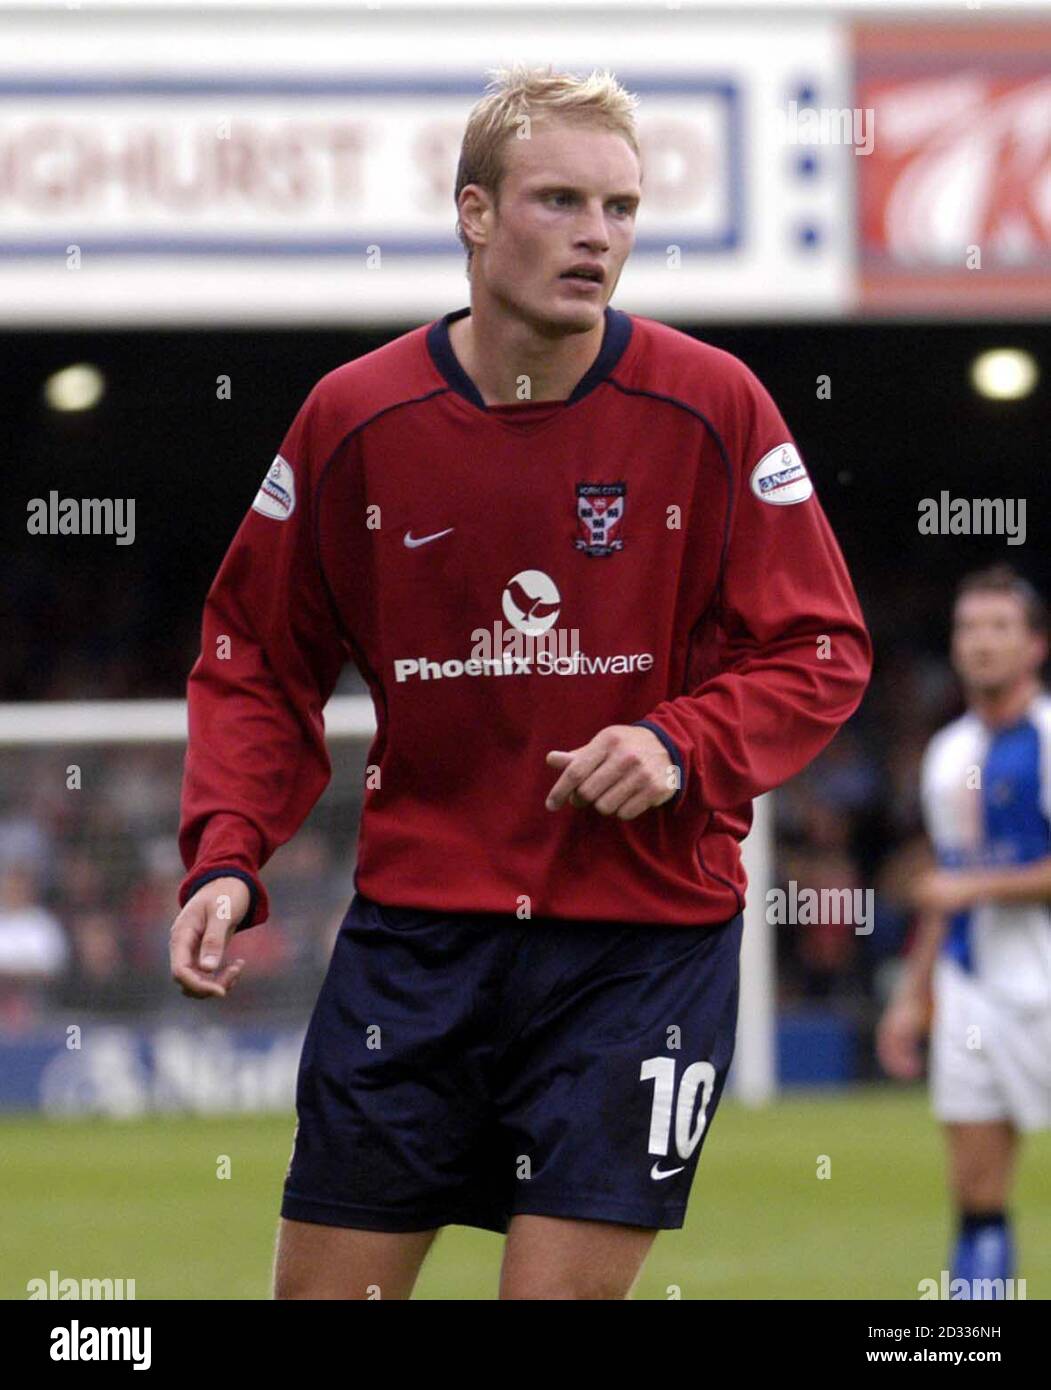 York City player Aron WIlford in action against Bristol Rovers  during the Nationwide Division Three match at Bootham Crescent, York. THIS PICTURE CAN ONLY BE USED WITHIN THE CONTEXT OF AN EDITORIAL FEATURE. NO UNOFFICIAL CLUB WEBSITE USE. Stock Photo